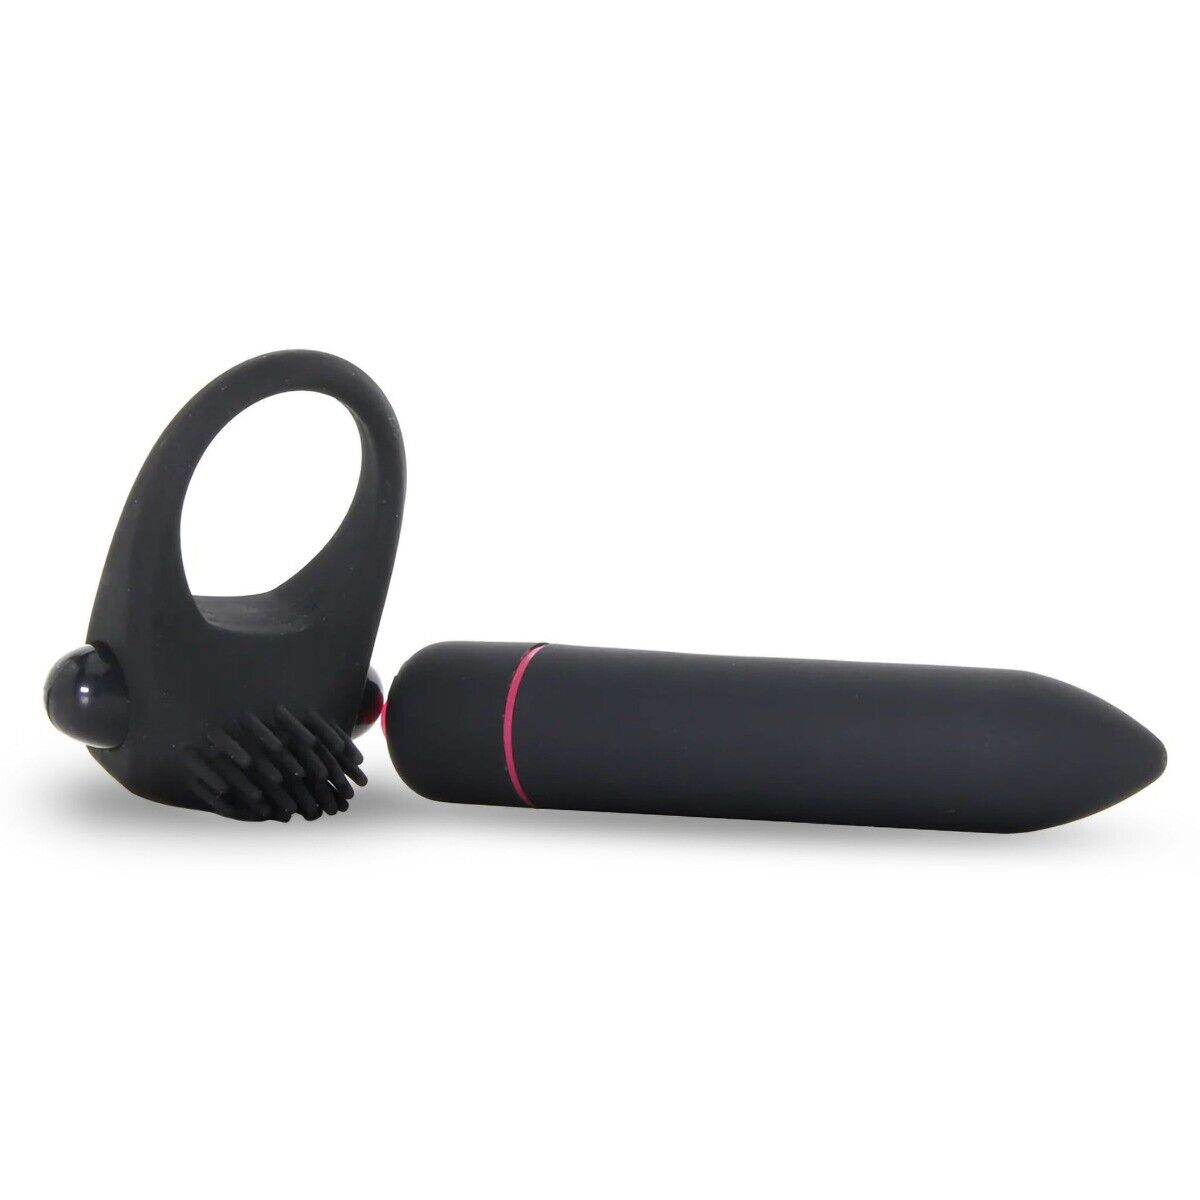 Vibrating Male Penis Enhancer Cock Ring and Bullet Vibrator Couple Sex Toys